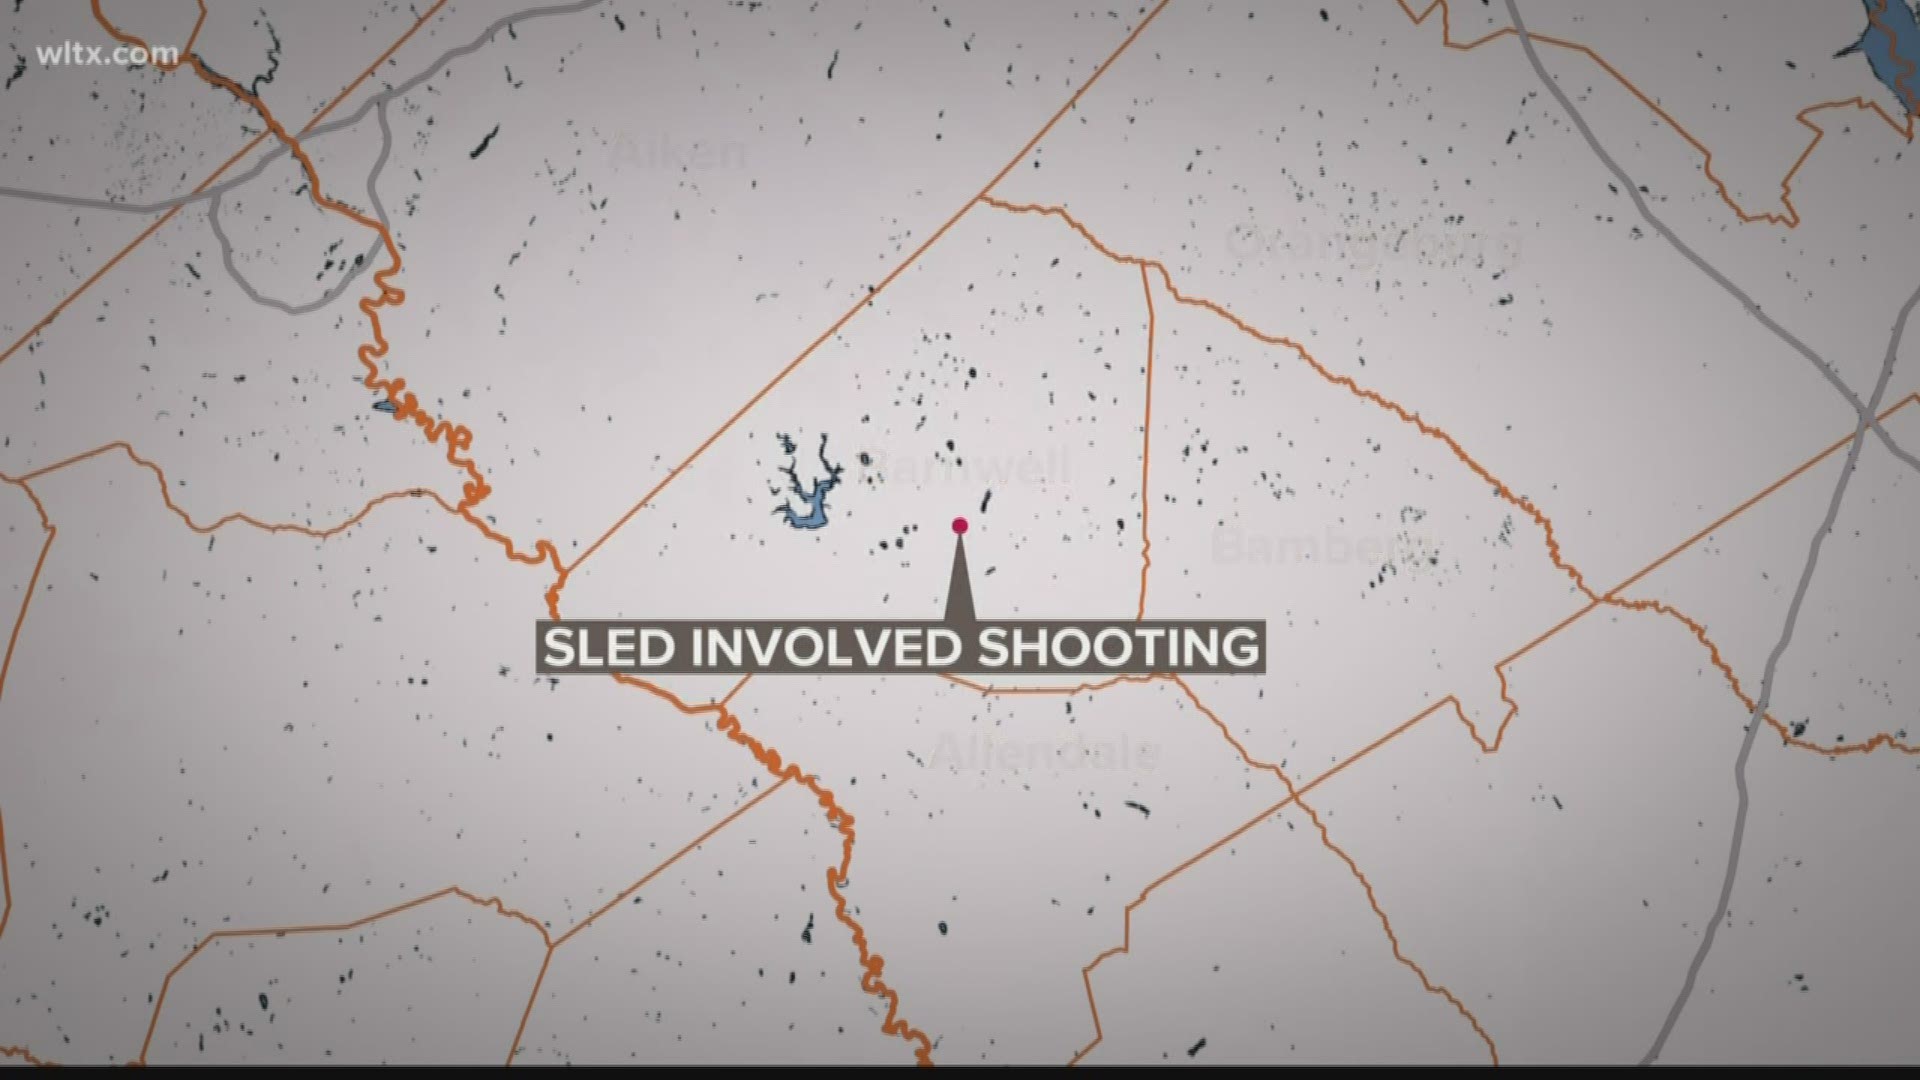 Aiken deputies are continuing to investigate a fatal shooting between a man in Barnwell and SLED agents.